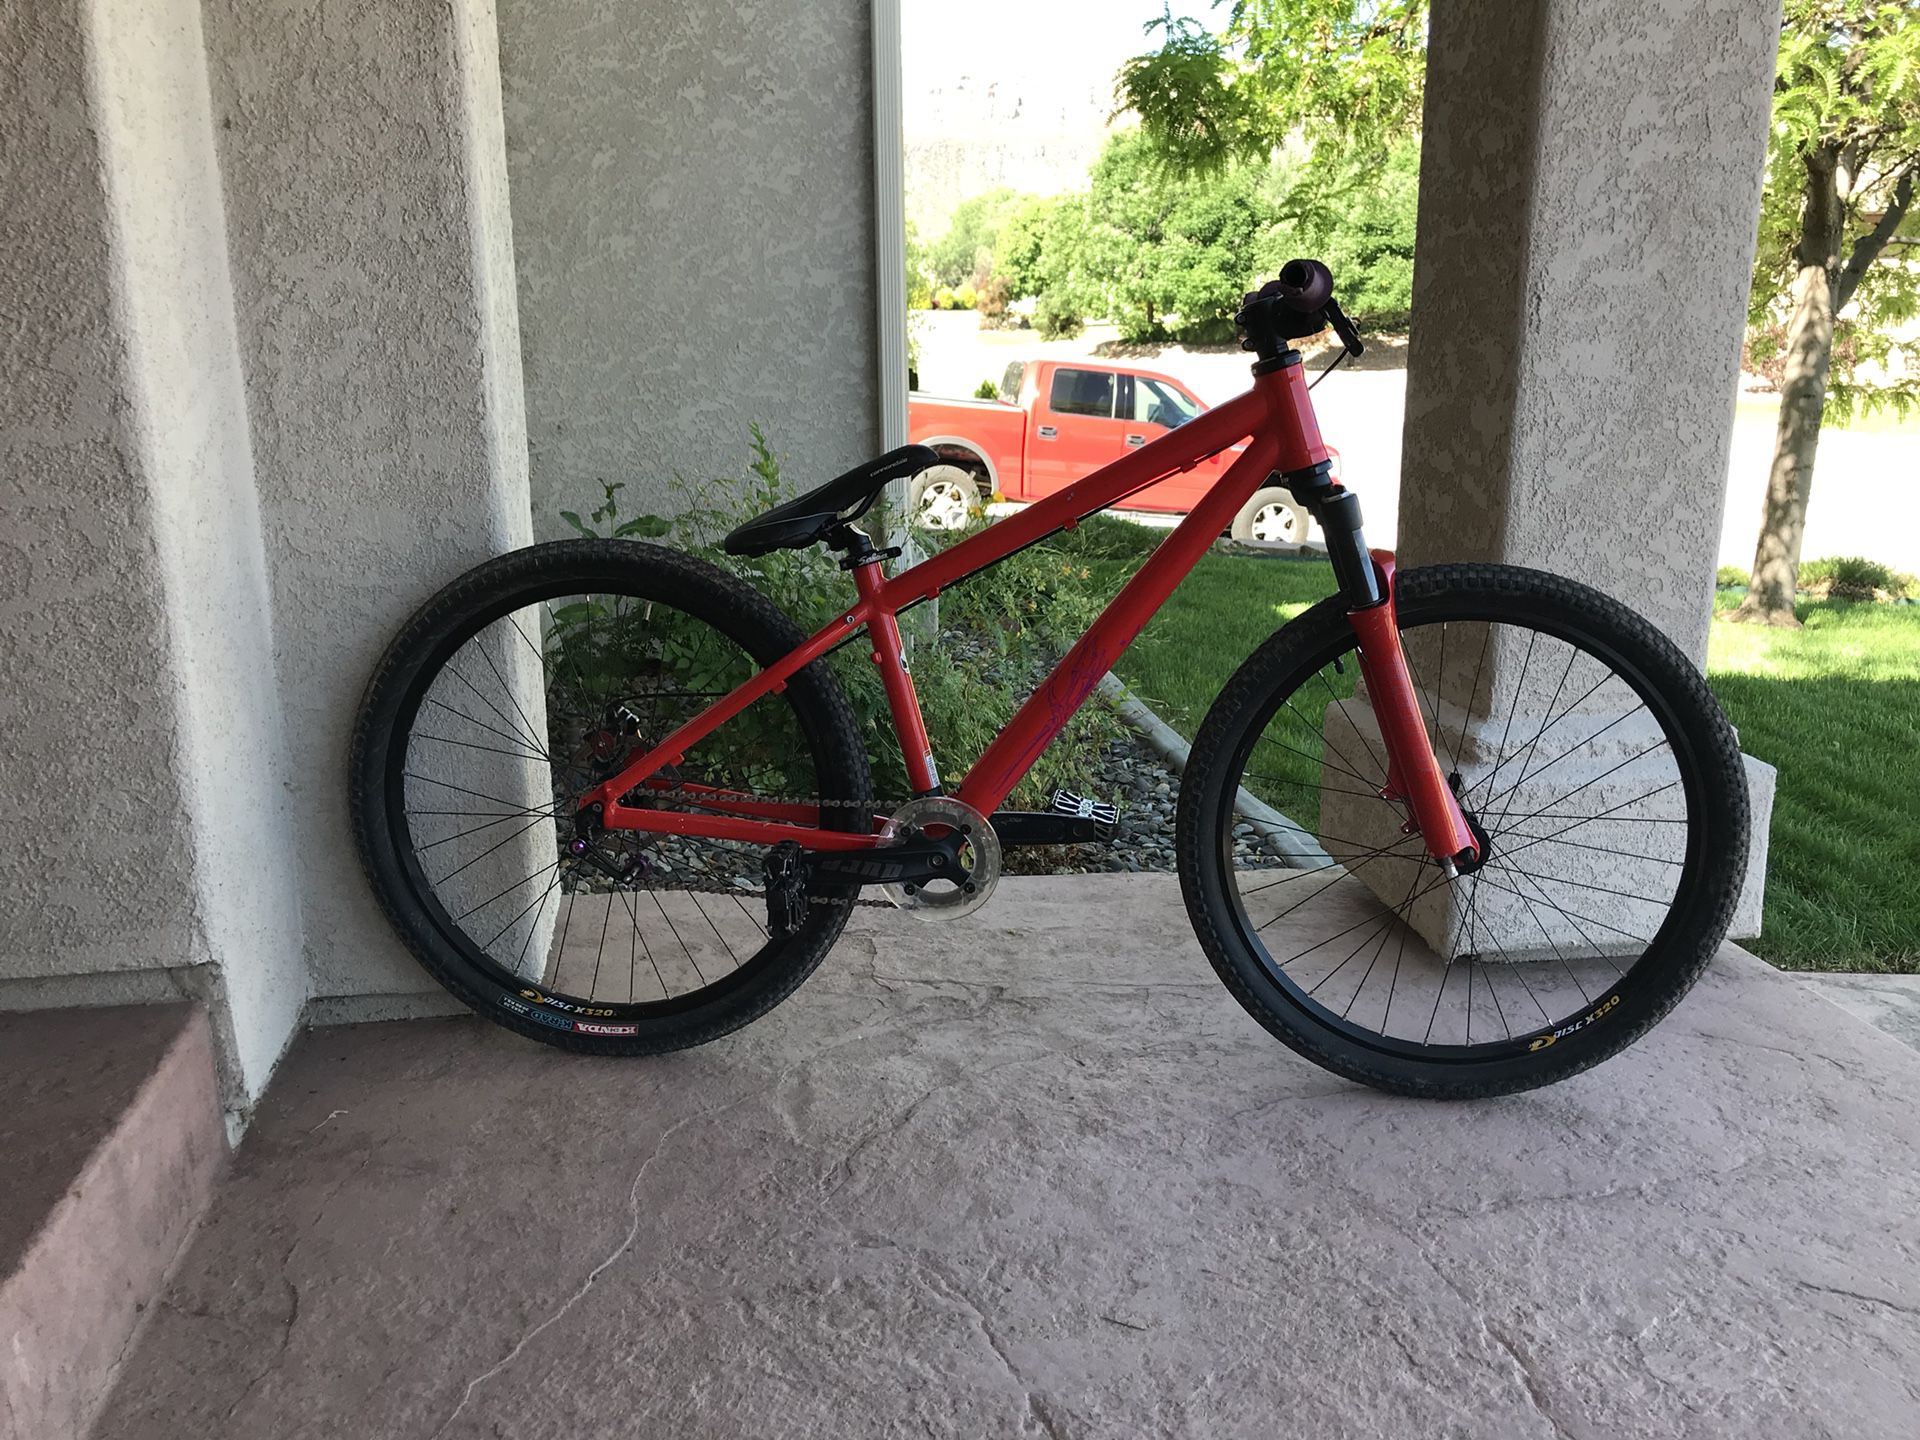 cement Weinig Aanpassingsvermogen 2009 Cannondale Chase 3 dirt jumper for Sale in Grand Junction, CO - OfferUp